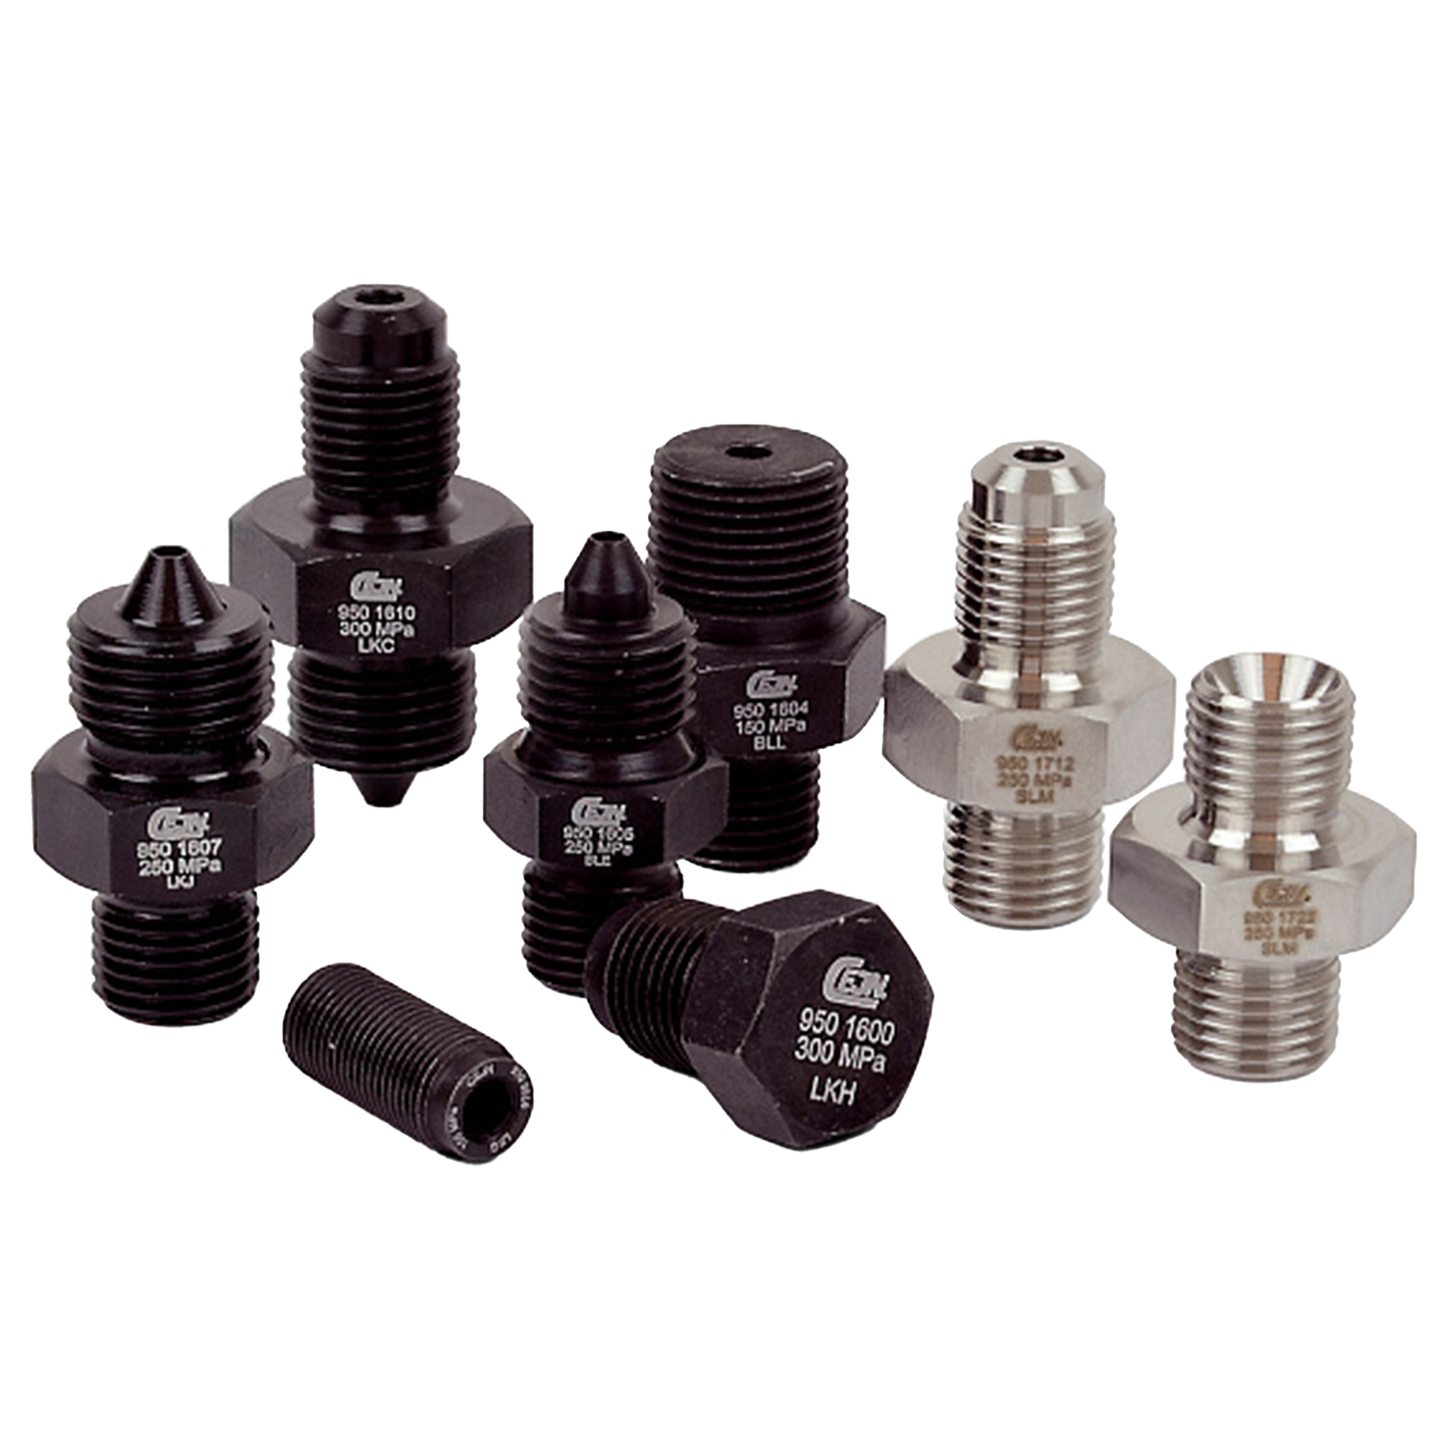 CEJN 19-950-1607 | Male Coupling Adaptor, G 1/4" and M16x1.5